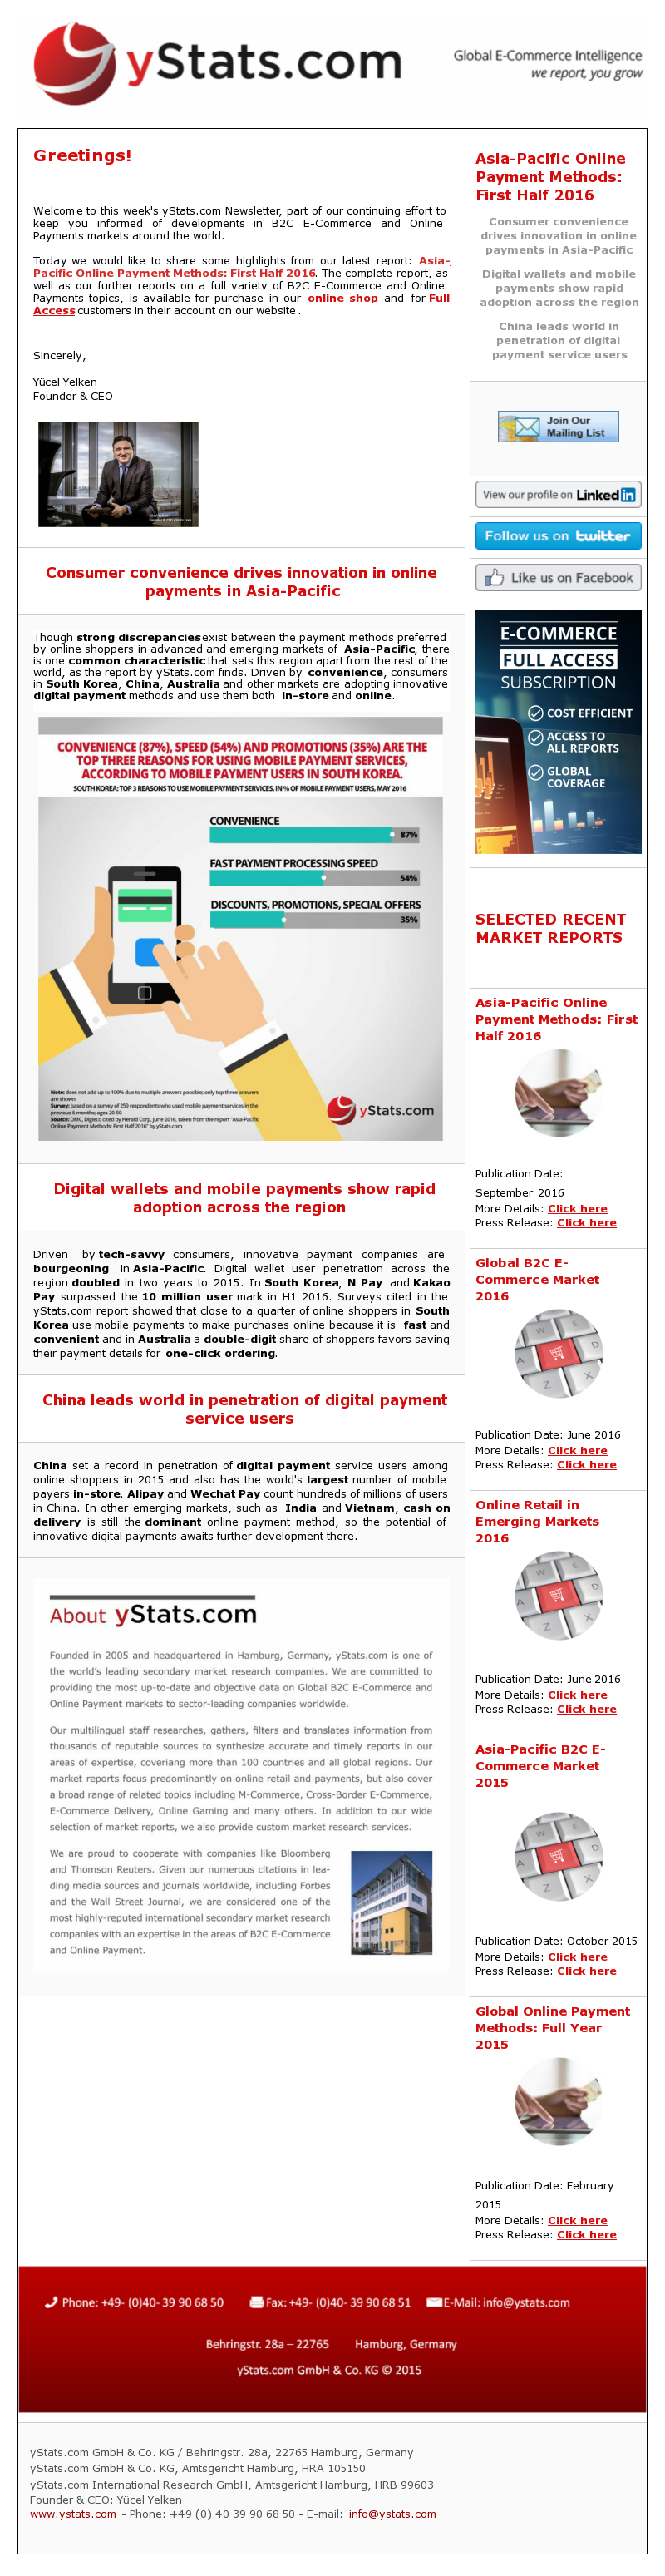 Asia-Pacific leads in online and mobile payment innovation

Though strong discrepancies exist between the payment methods preferred by online shoppers in advanced and emerging markets of Asia-Pacific, there is one common characteristic that sets this region apart from the rest of the world, as the report by yStats.com finds. Driven by convenience, consumers in South Korea, China, Australia and other markets are adopting innovative digital payment methods and use them both in-store and online.

Driven by tech-savvy consumers, innovative payment companies are bourgeoning in Asia-Pacific. Digital wallet user penetration across the region doubled in two years to 2015. In South Korea, N Pay and Kakao Pay surpassed the 10 million user mark in H1 2016. Surveys cited in the yStats.com report showed that close to a quarter of online shoppers in South Korea use mobile payments to make purchases online because it is fast and convenient and in Australia a double-digit share of shoppers favors saving their payment details for one-click ordering.

China set a record in penetration of digital payment service users among online shoppers in 2015 and also has the world’s largest number of mobile payers in-store. Alipay and Wechat Pay count hundreds of millions of users in China. In other emerging markets, such as India and Vietnam, cash on delivery is still the dominant online payment method, so the potential of innovative digital payments awaits further development there.